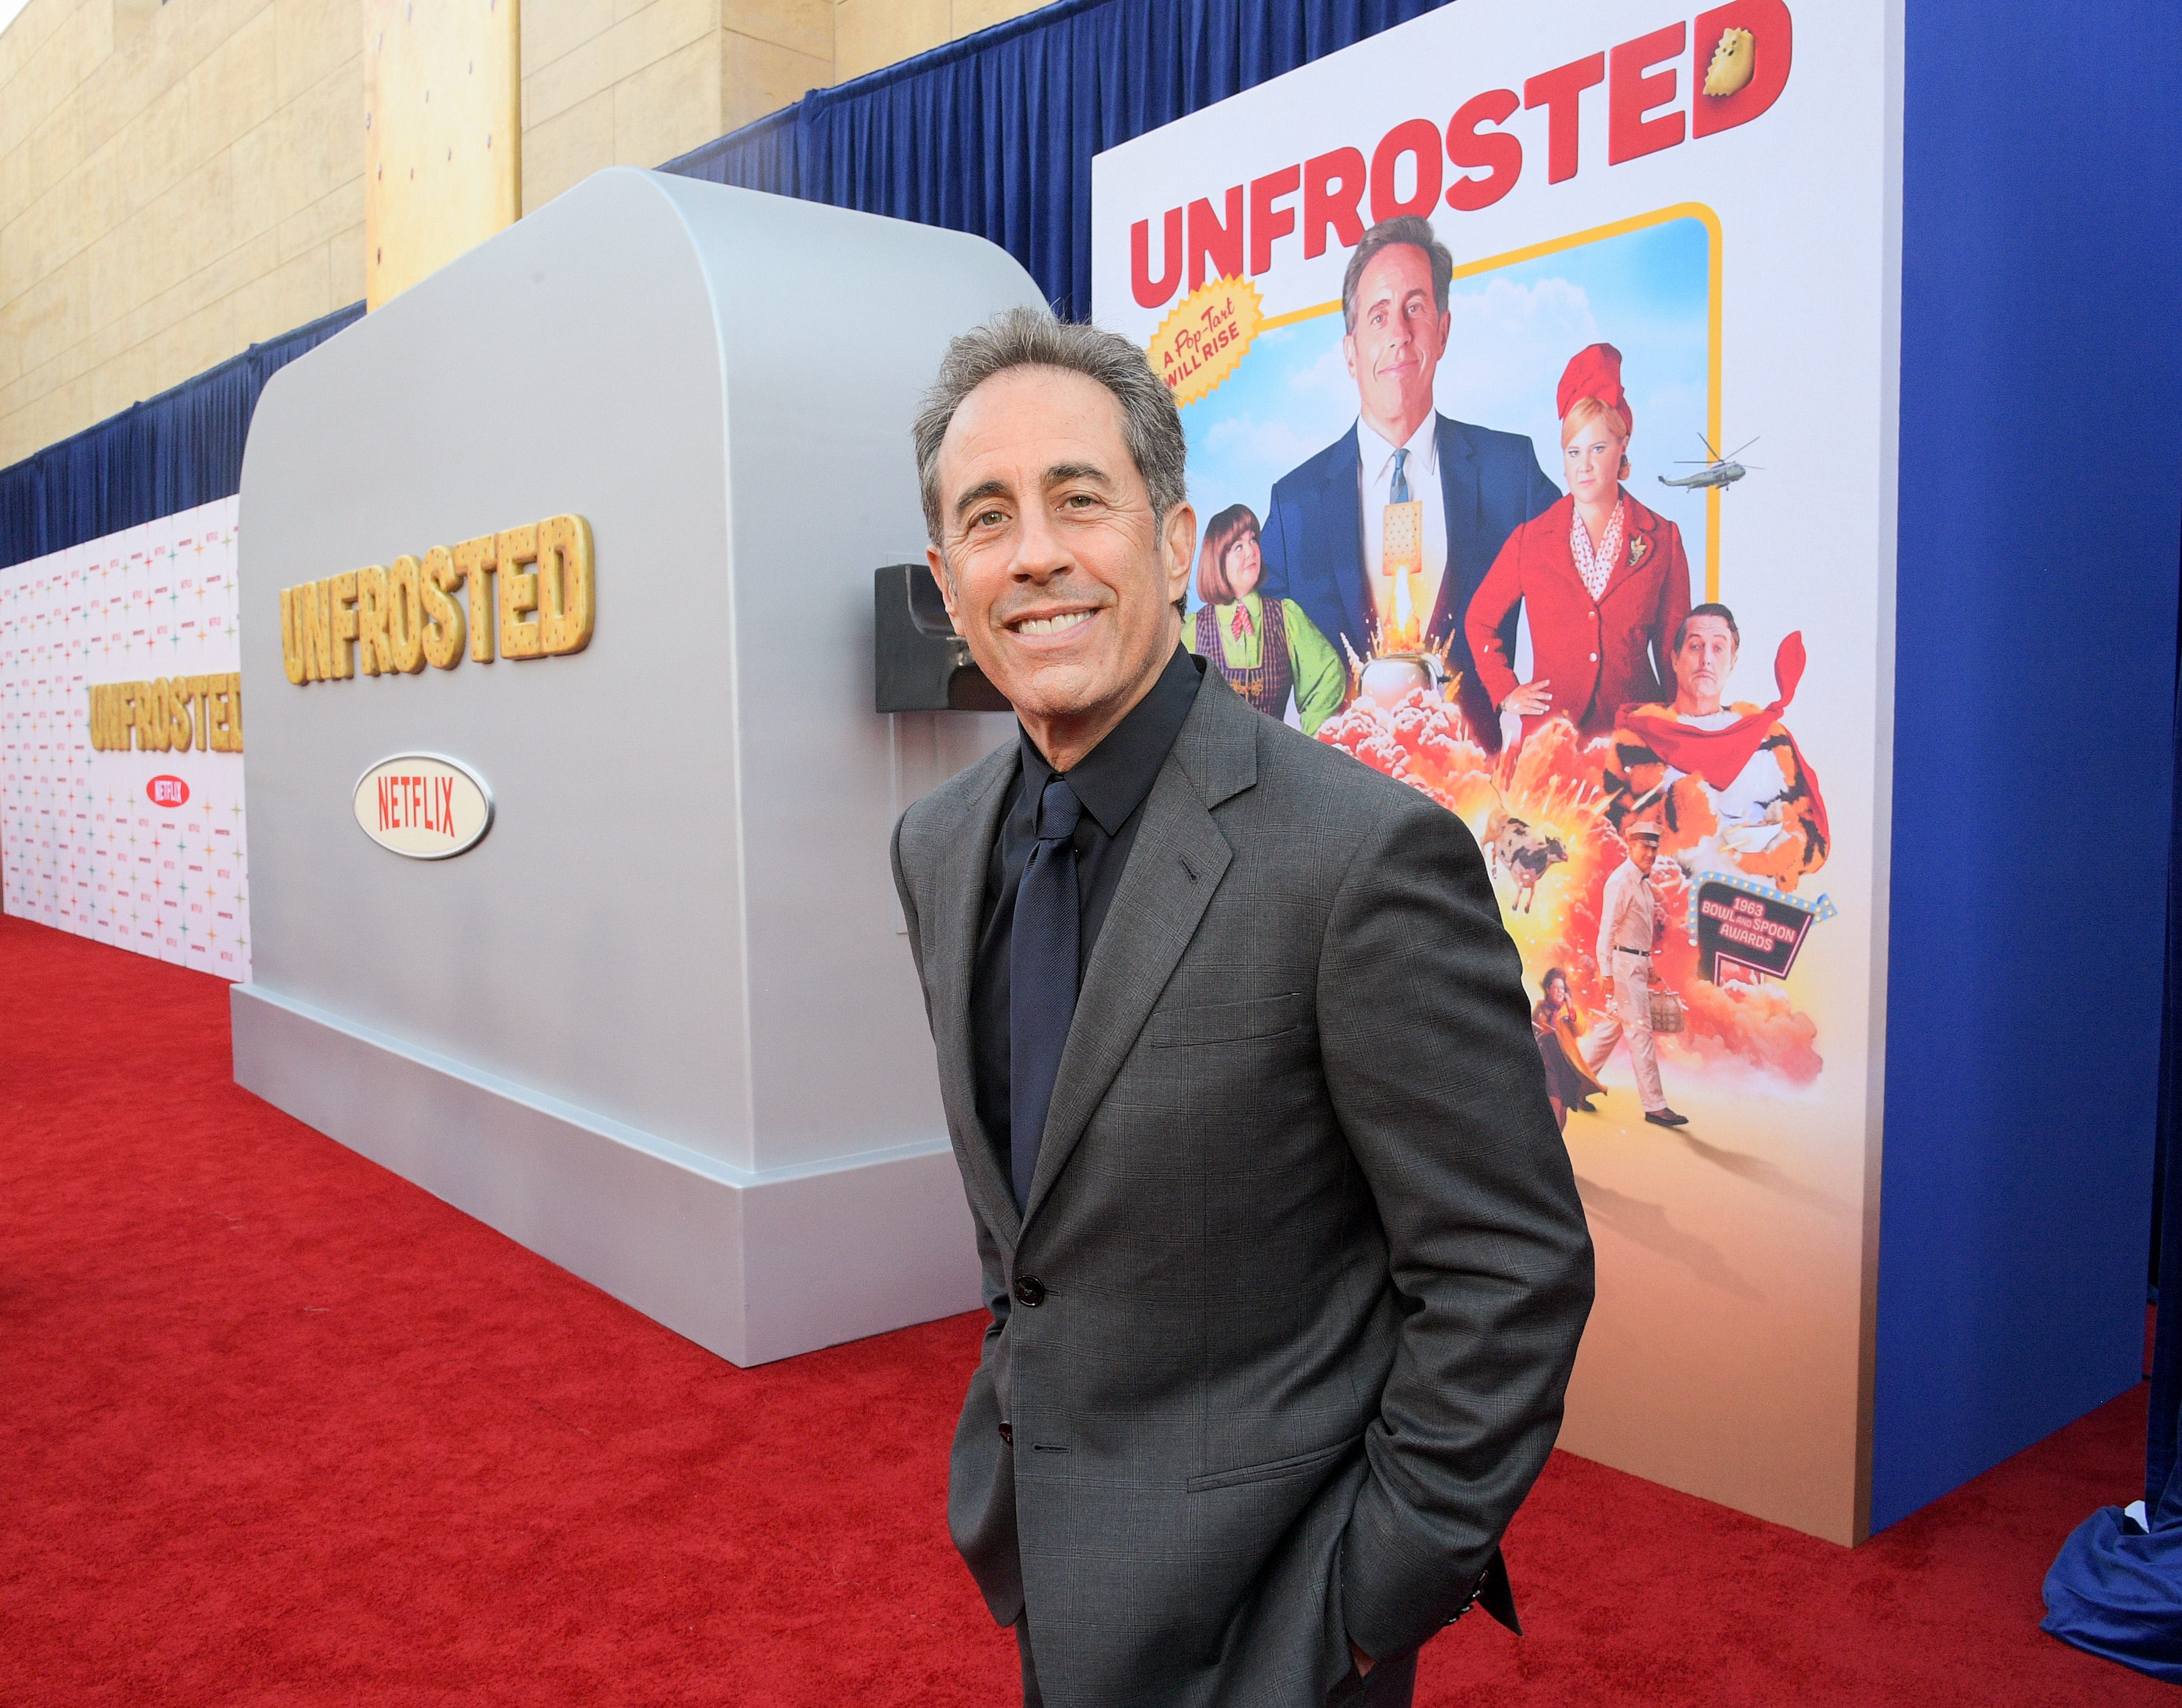 Jerry Seinfeld mocks latest pro-Palestinian protesters: 'Just gave more money to a Jew'